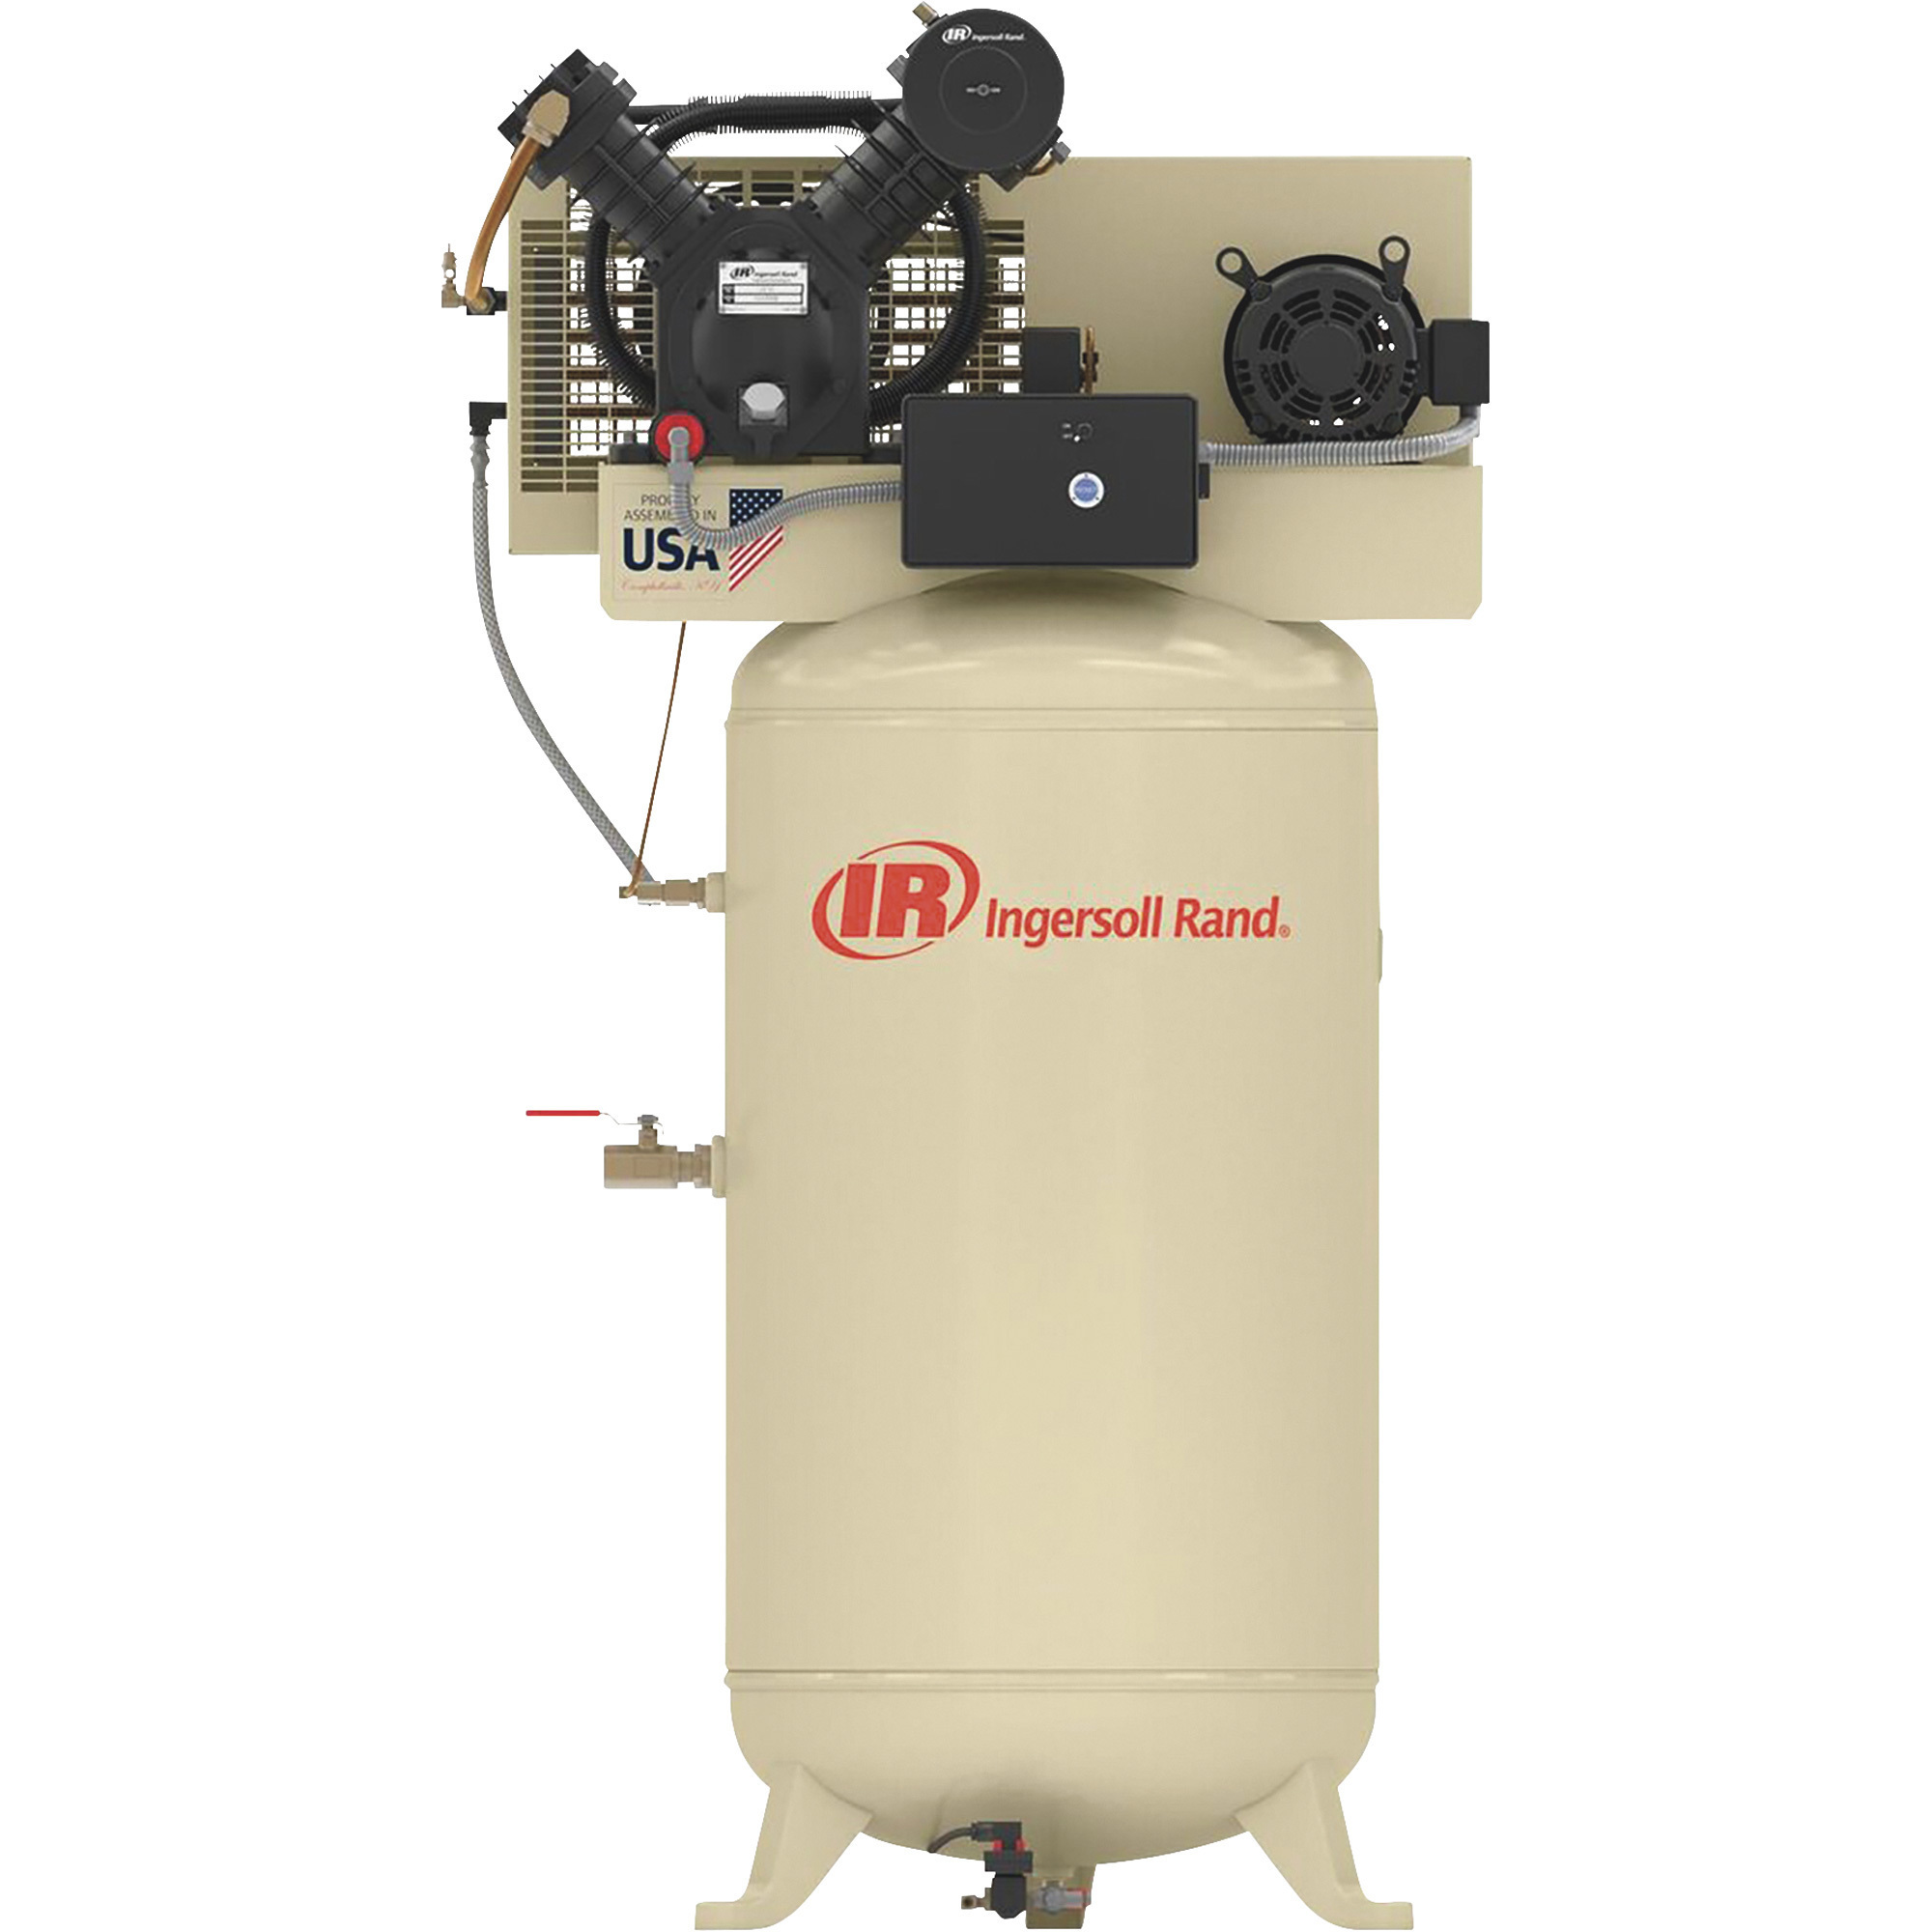 Ingersoll Rand Type-30 Reciprocating Air Compressor (Fully Packaged), 5 HP, 230 Volt, 3 Phase, 80 Gallon, Model 2475N5FP